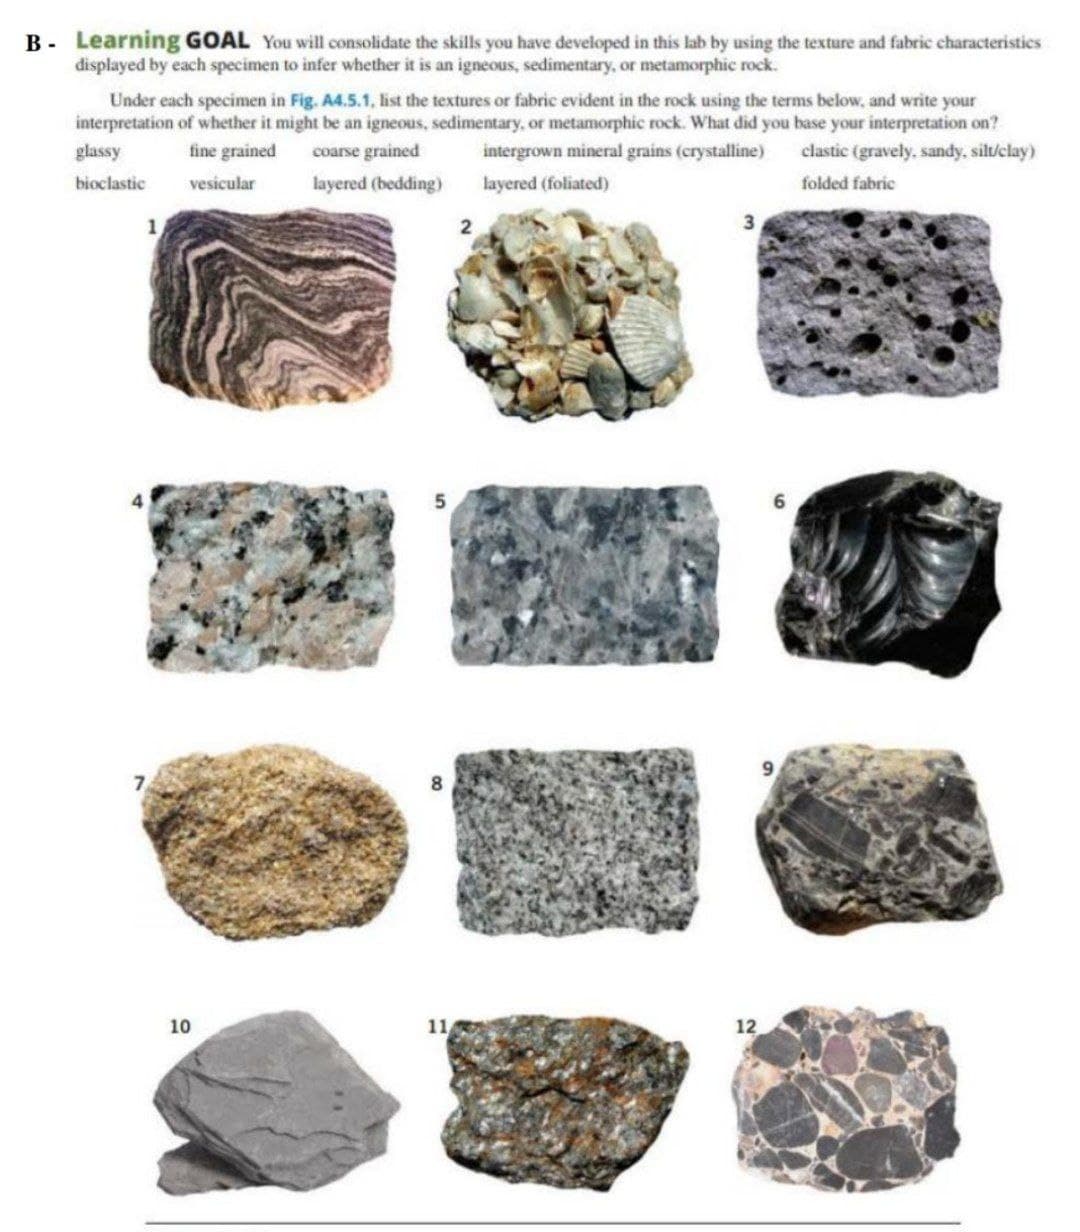 B - Learning GOAL You will consolidate the skills you have developed in this lab by using the texture and fabric characteristics
đisplayed by each specimen to infer whether it is an igneous, sedimentary, or metamorphic rock.
Under each specimen in Fig. A4.5.1, list the textures or fabric evident in the rock using the terms below, and write your
interpretation of whether it might be an igneous, sedimentary, or metamorphic rock. What did you base your interpretation on?
glassy
fine grained
coarse grained
intergrown mineral grains (crystalline)
clastic (gravely, sandy, siluclay)
bioclastic
vesicular
layered (bedding)
layered (foliated)
folded fabric
10
11
12
